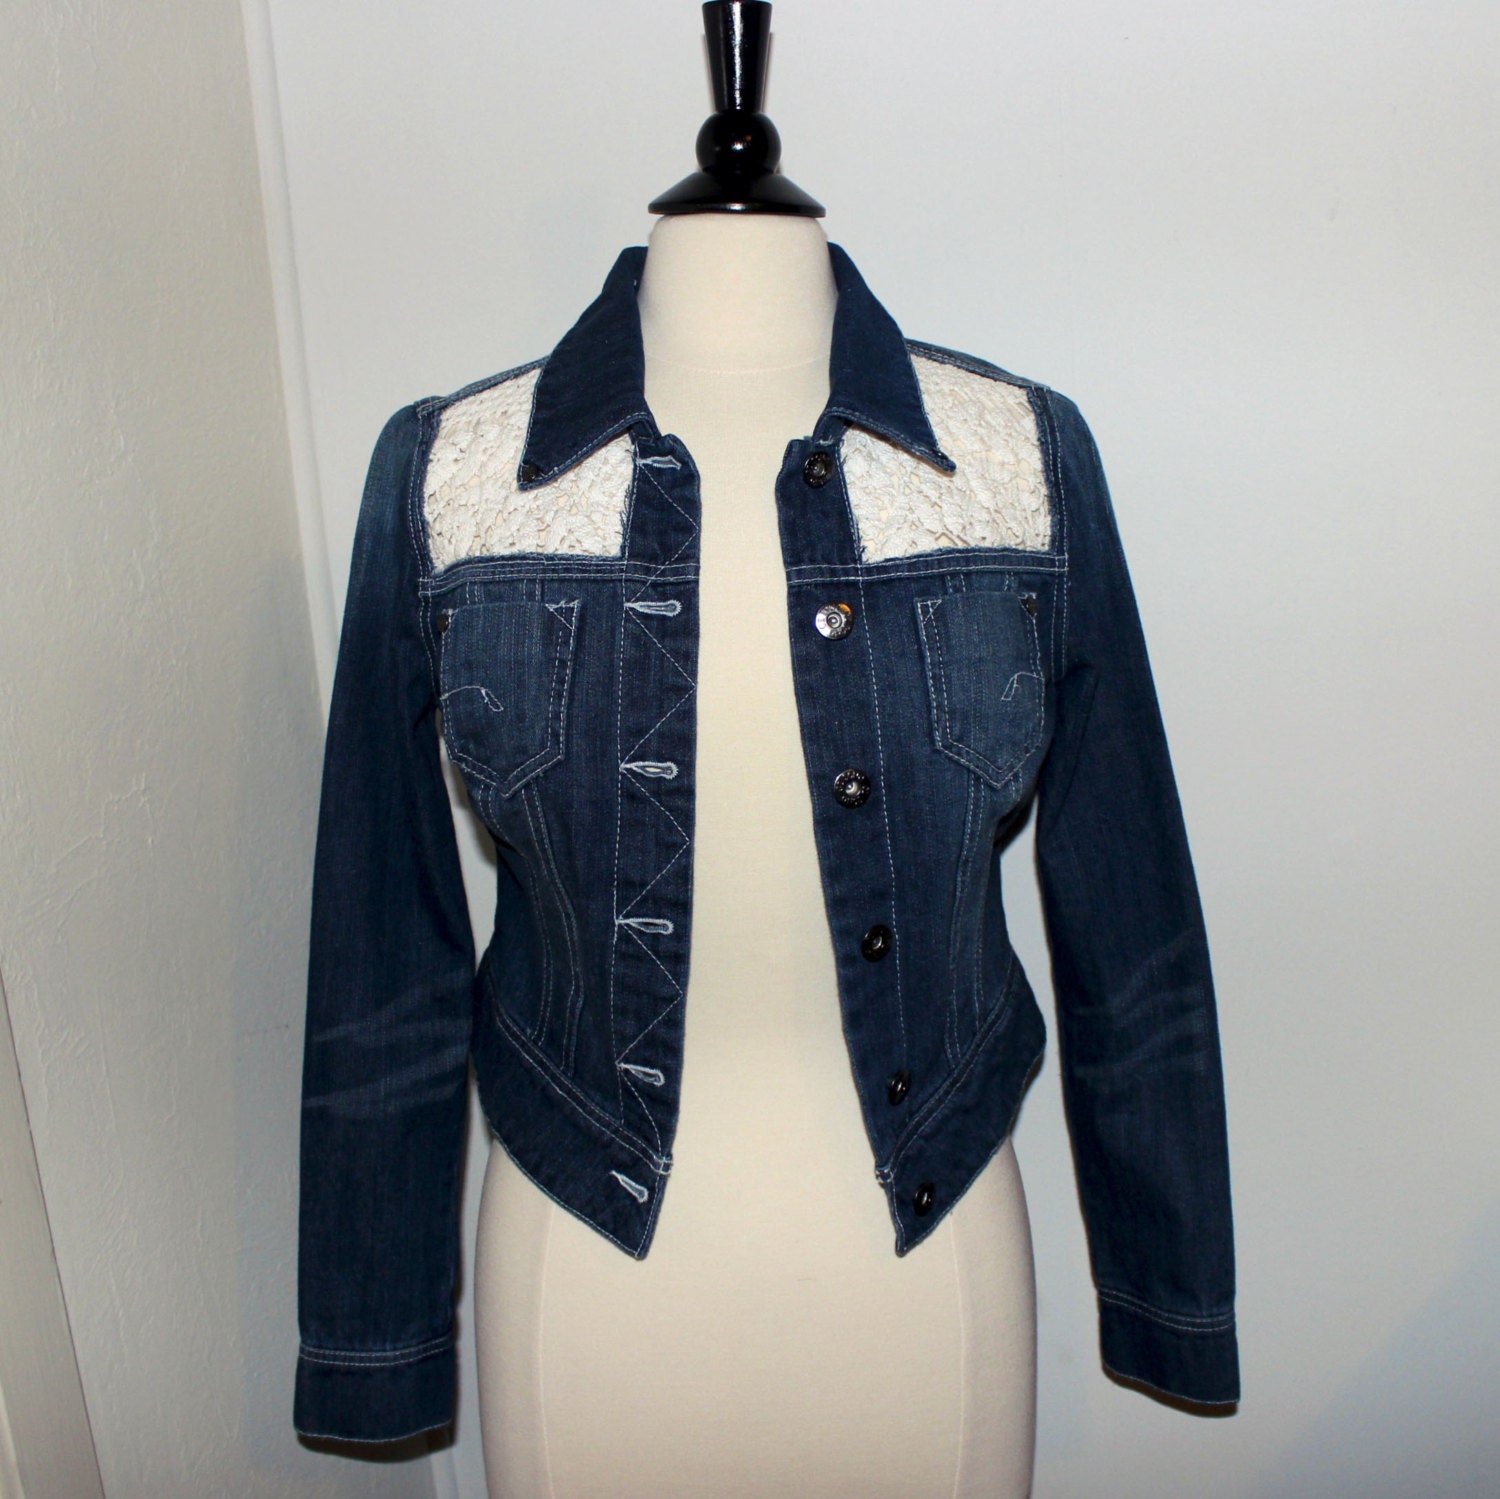 Upcycled Jean Jacket with Crochet Lace Inserts Cut-out Panels